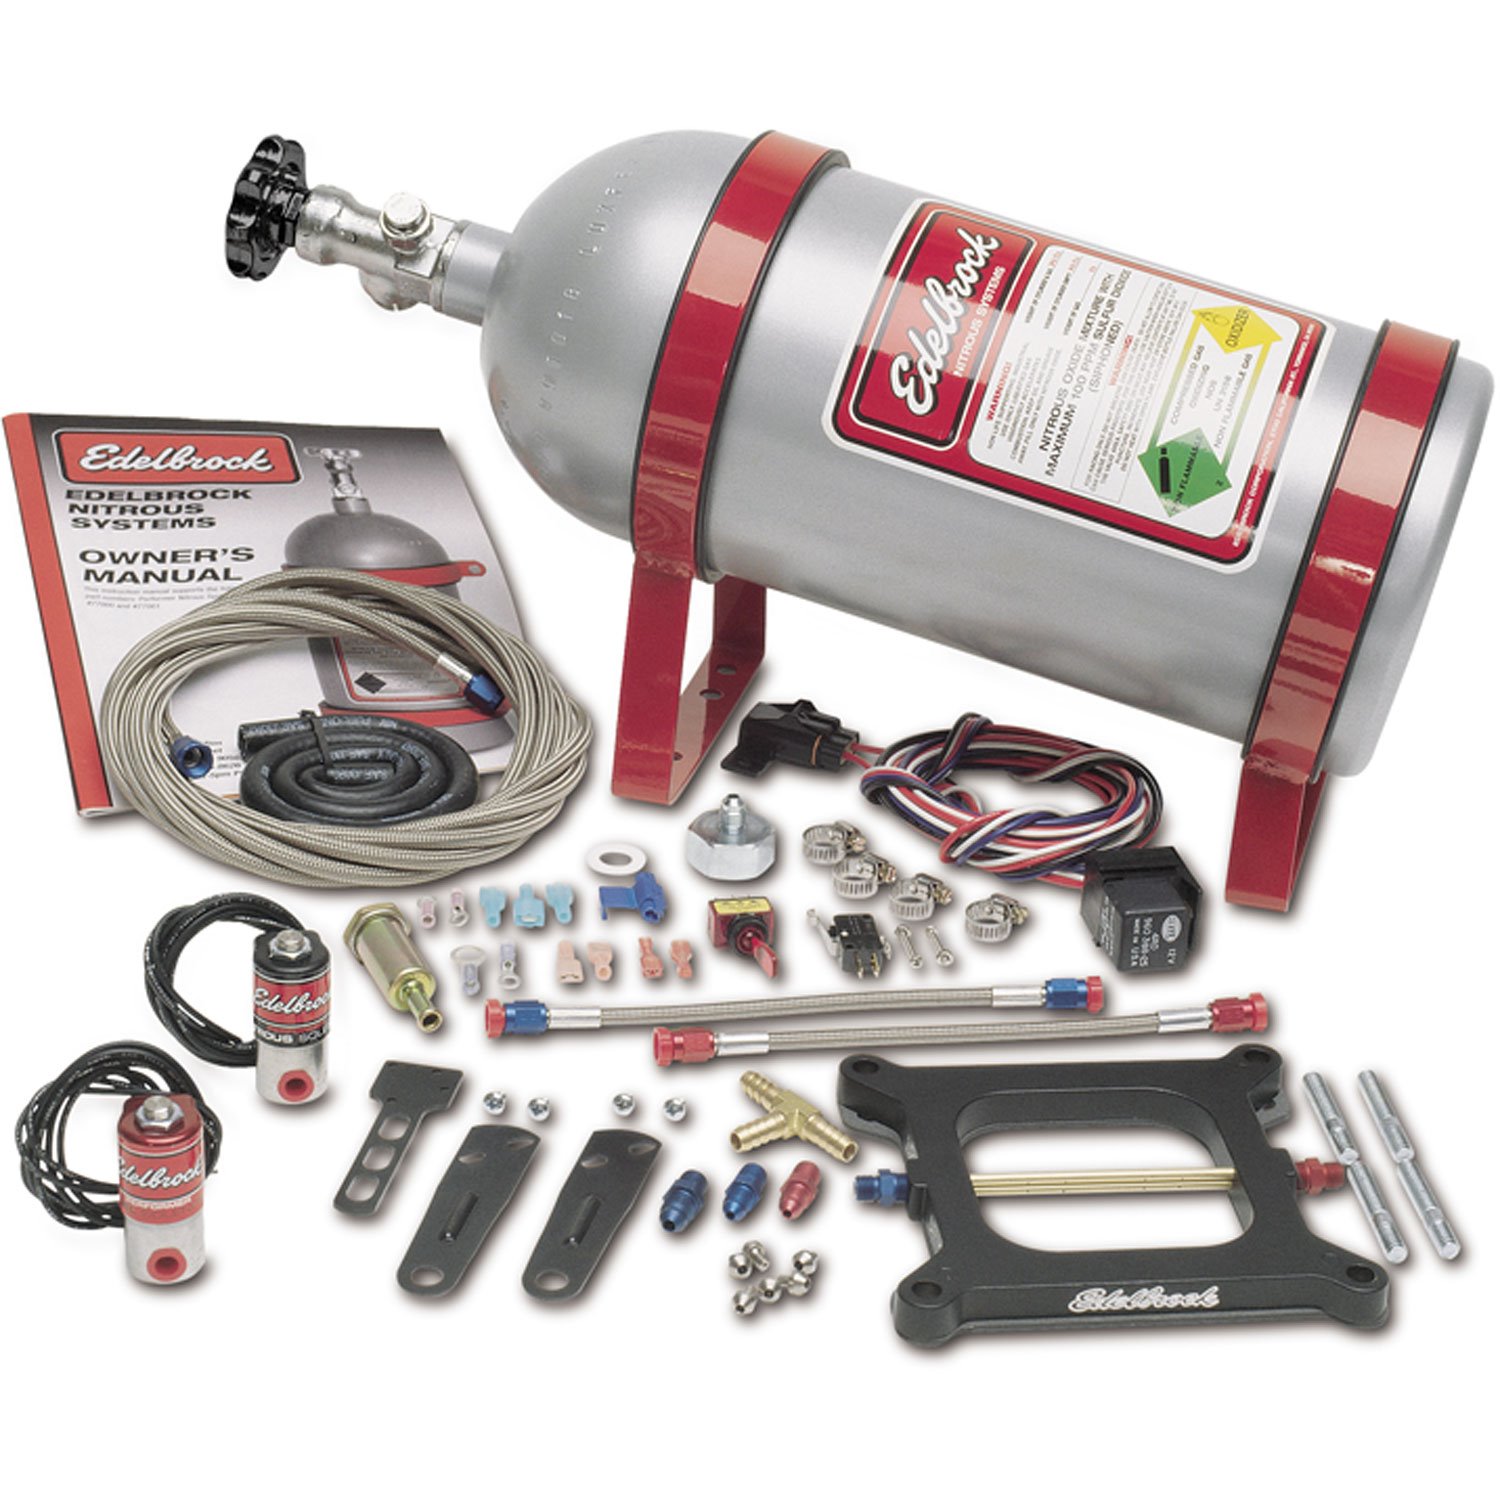 Performer Single Stage Nitrous Kit for 4150 Squar-bore Carburetor with Silver Powder Coated Bottle